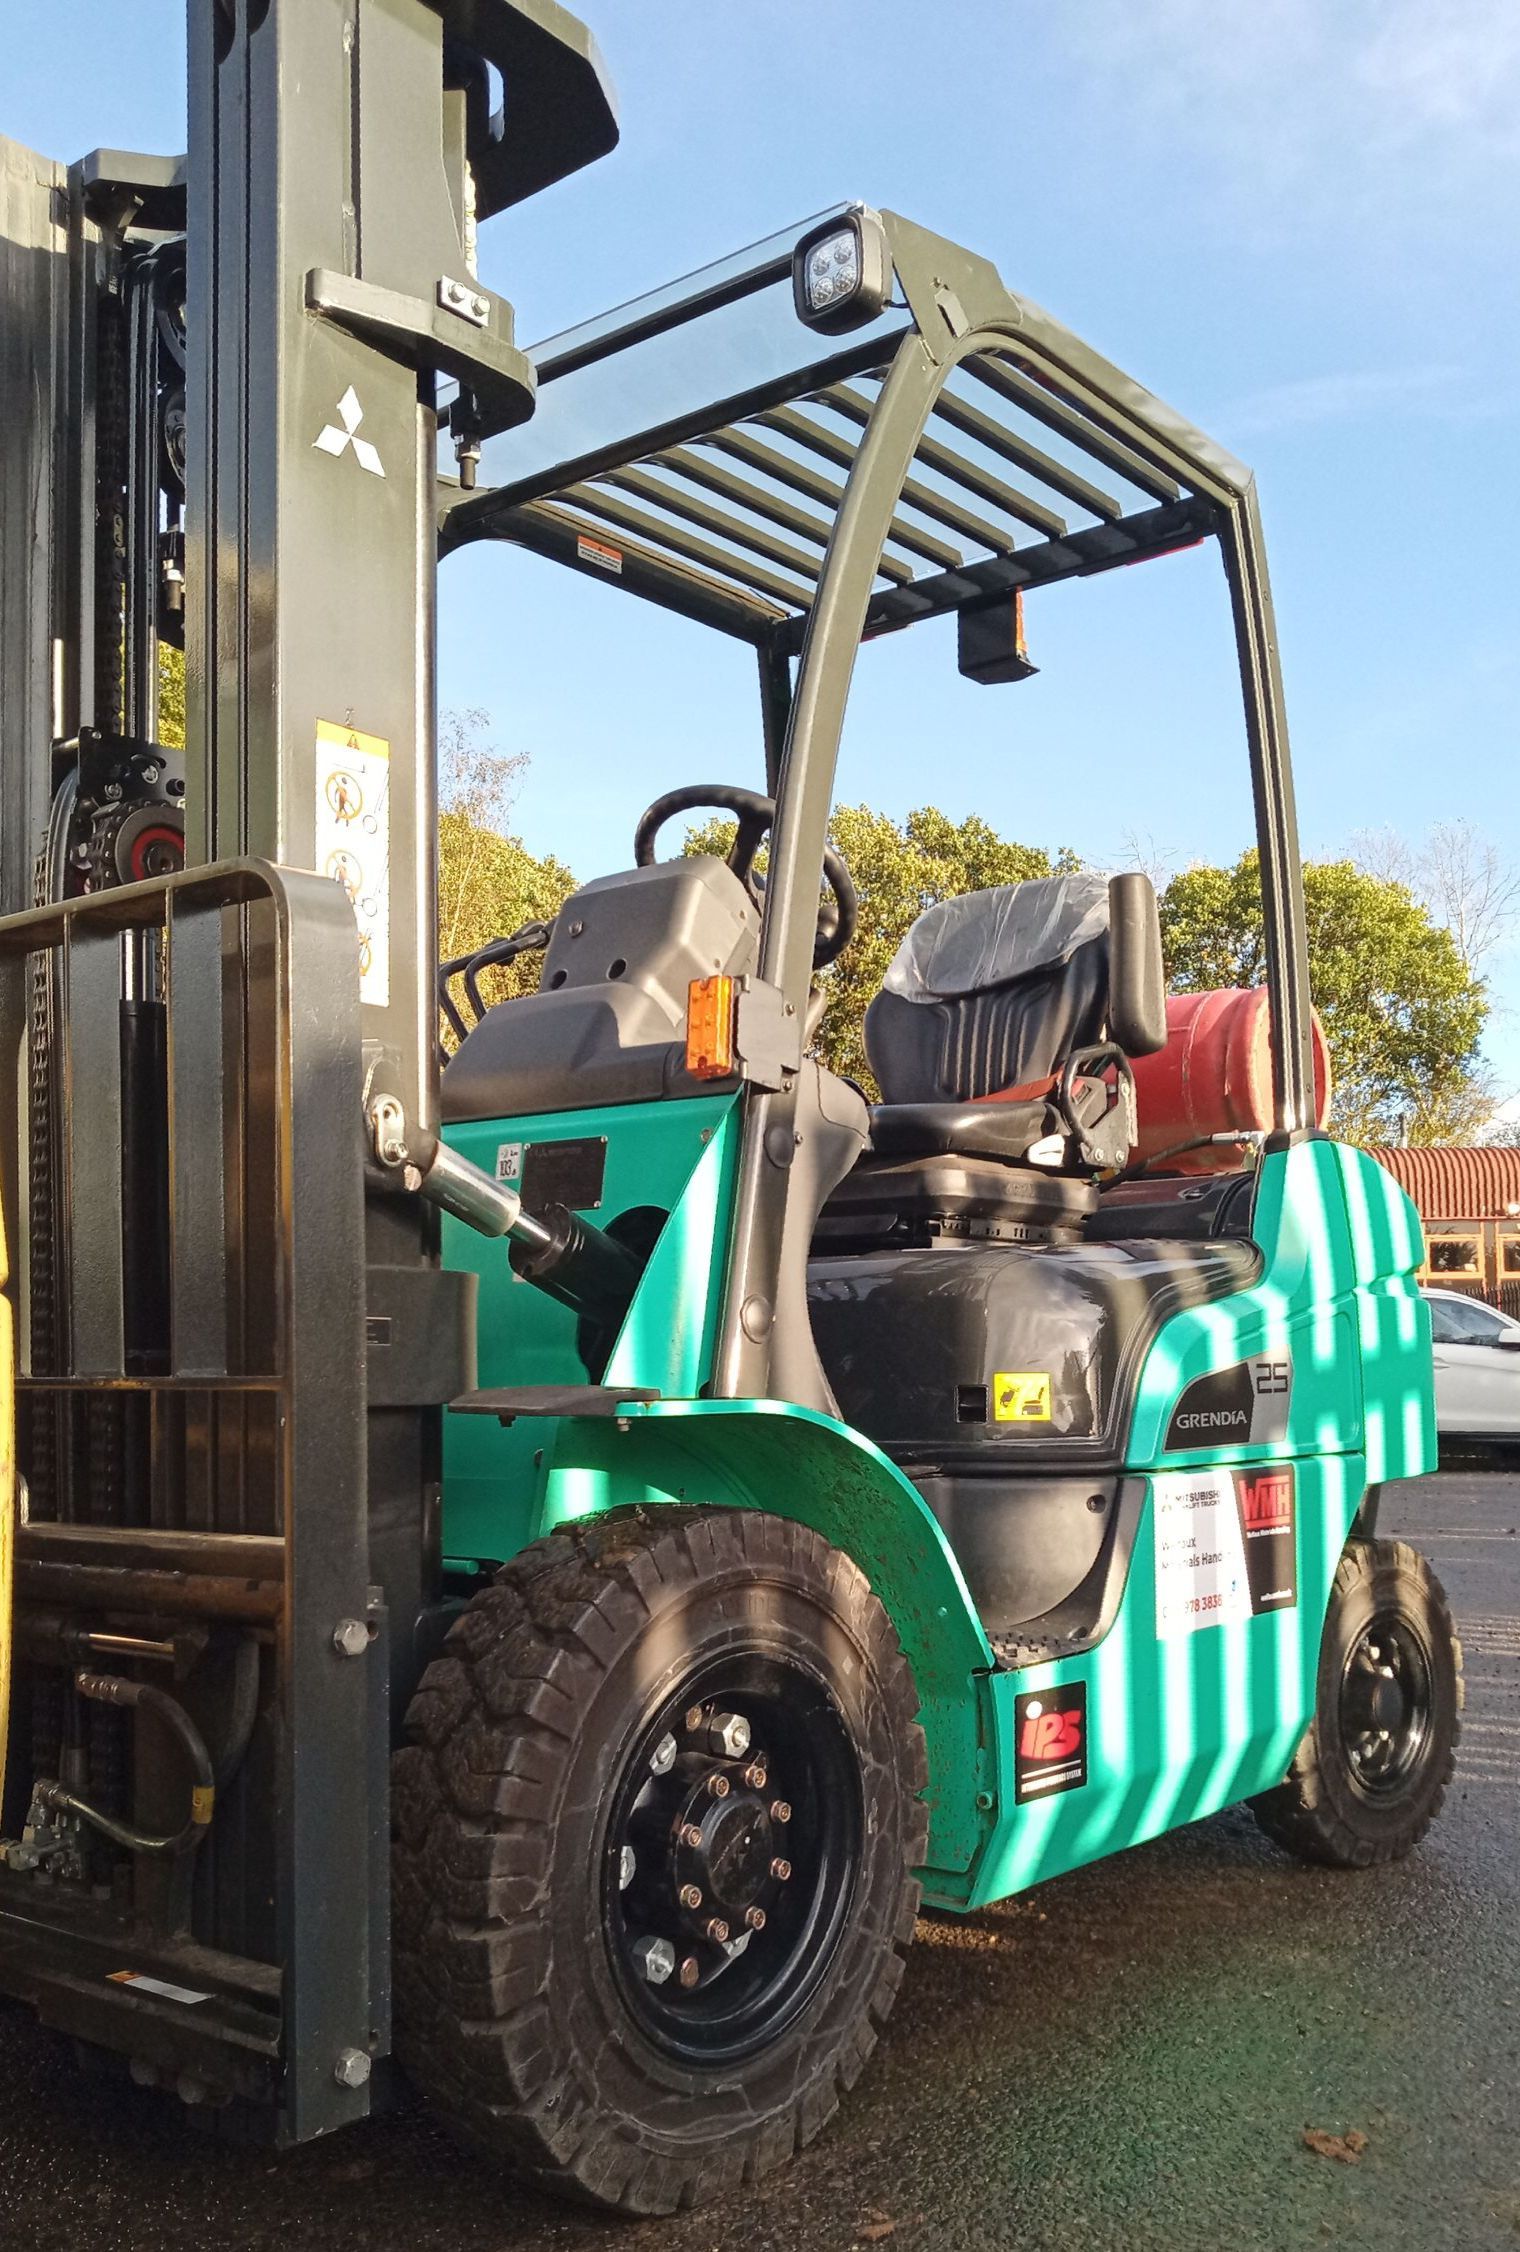 A green and black forklift is parked in a parking lot.